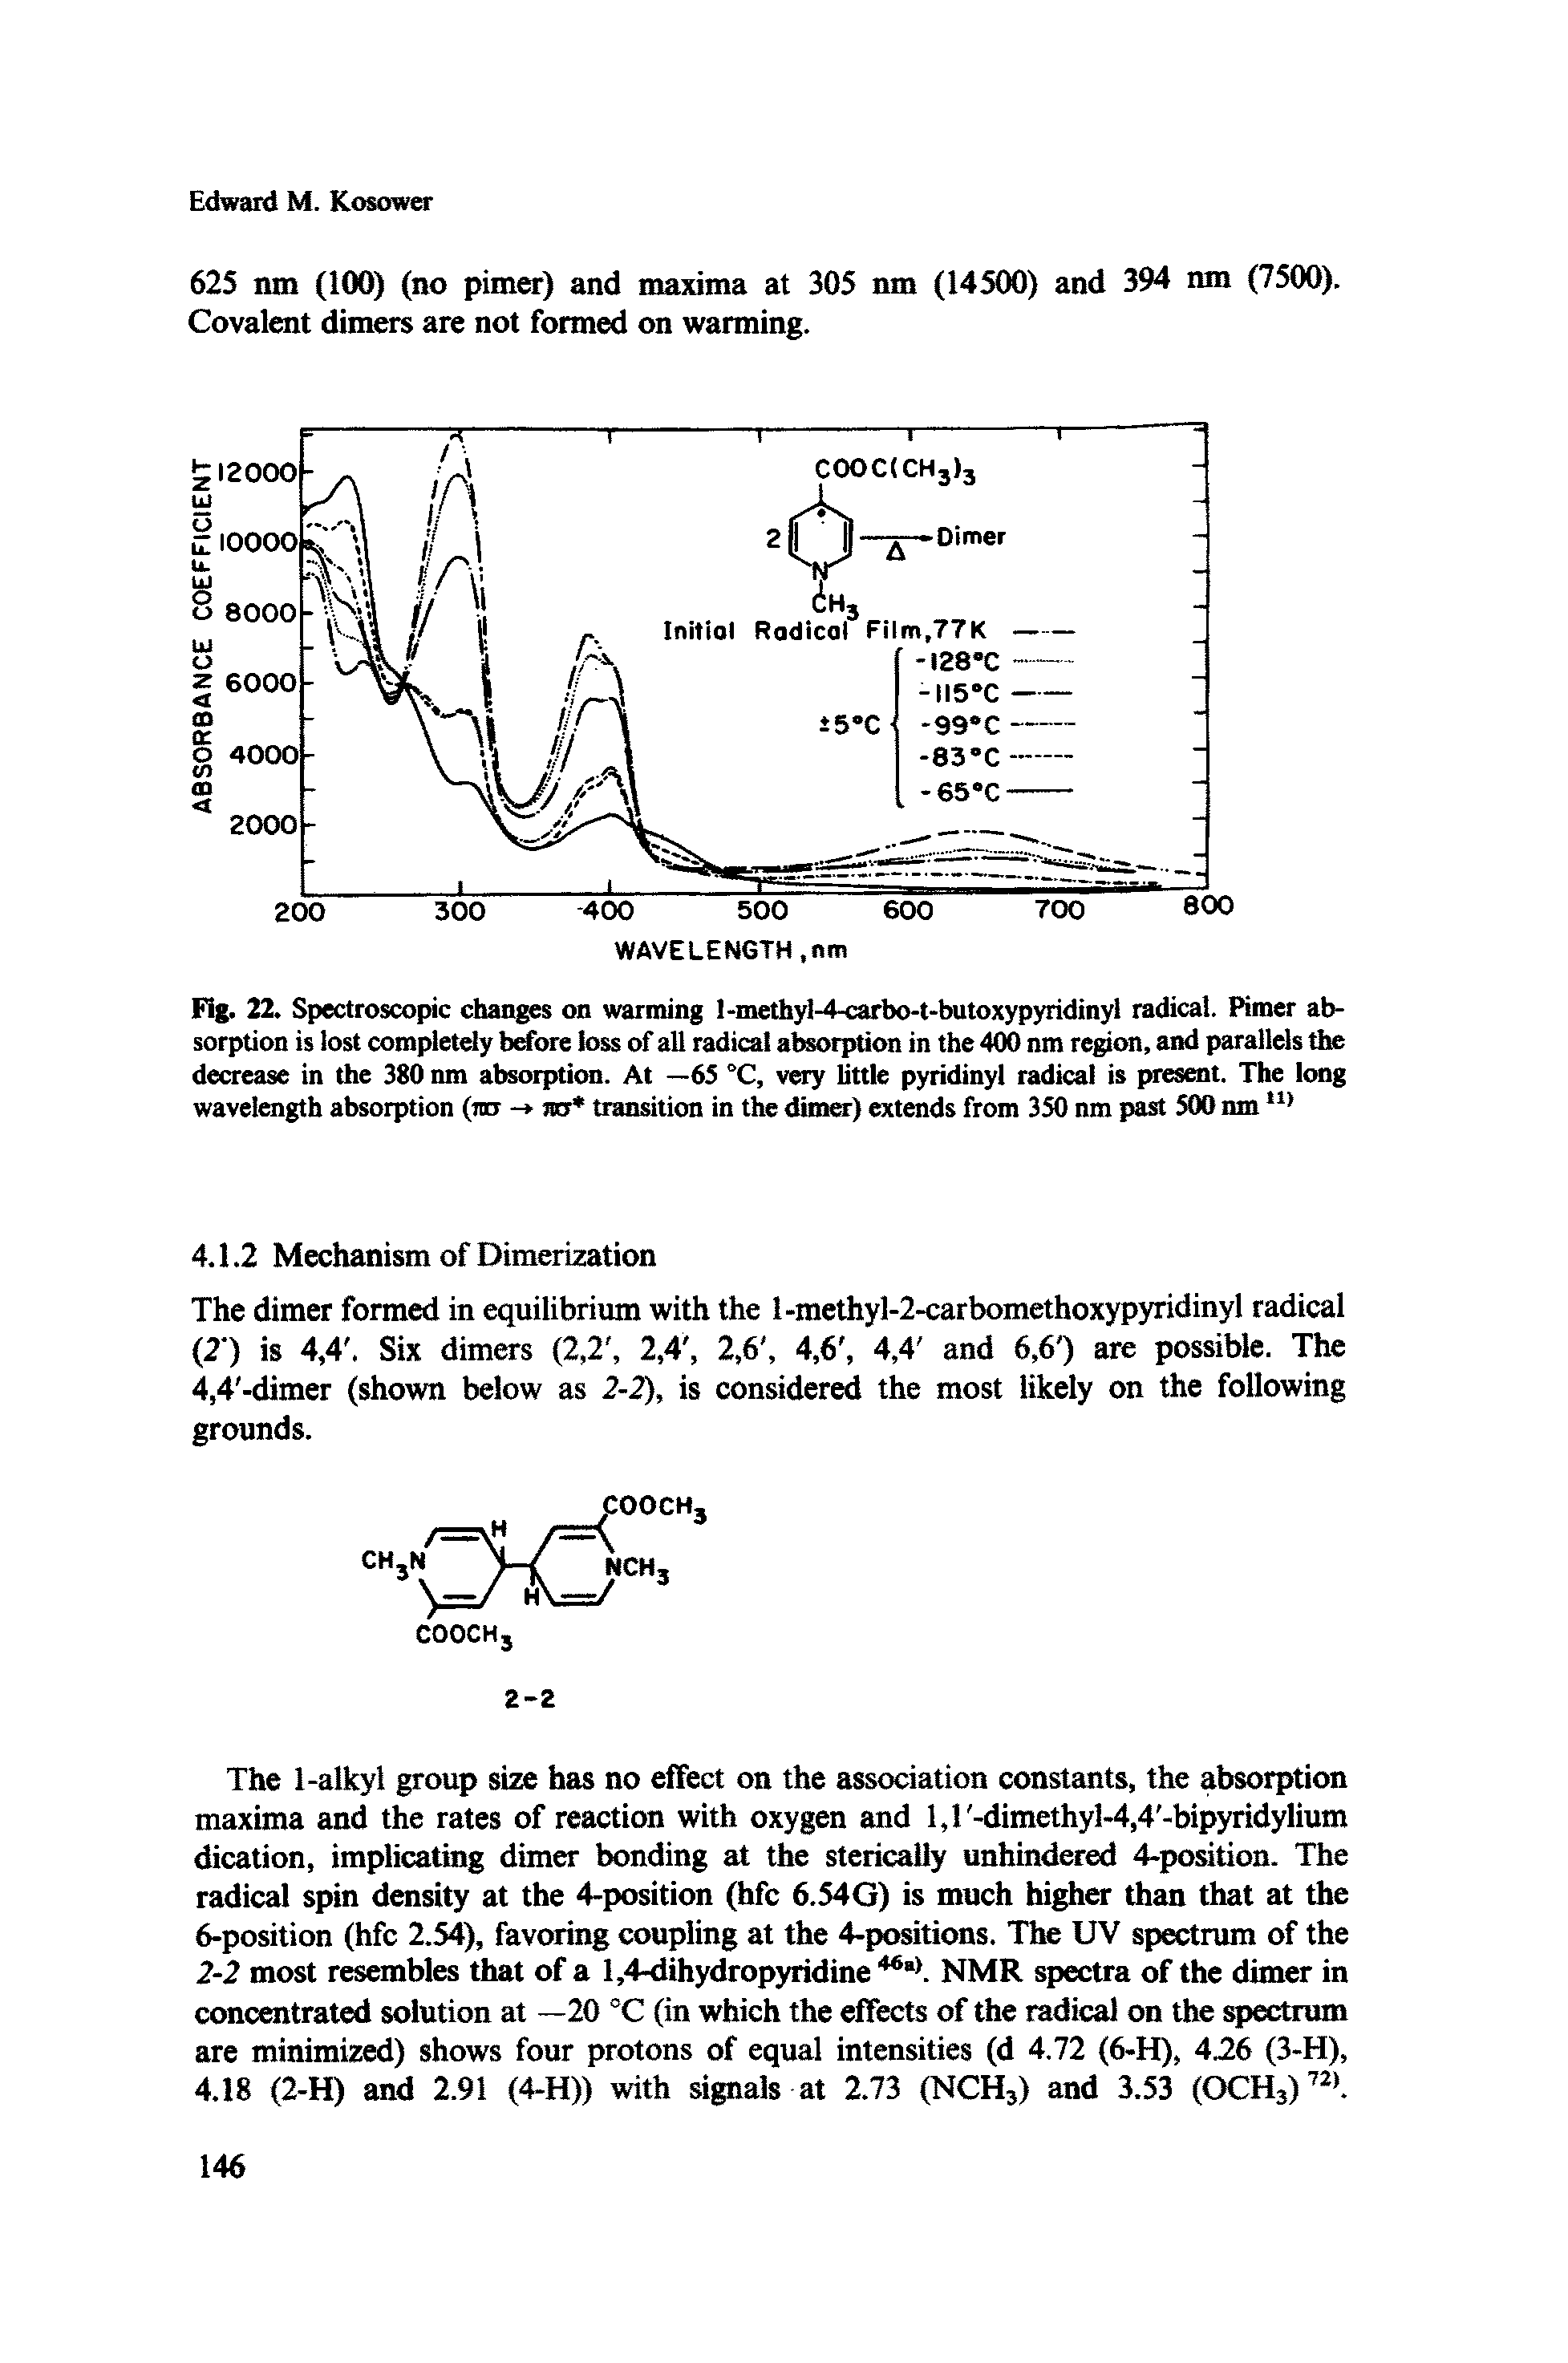 Fig. 22. Spectroscopic changes on warming l-methyl-4-carbo-t-butoxypyridinyl radical. Pimer absorption is tost completely brfore loss of all radical absorption in the 400 nm region, and parallels the decrease in the 380 nm absorption. At —65 °C, very little pyridinyl radical is present. The long wavelength absorption (rar wj transition in the dimer) extends from 350 nm past 500 nm...